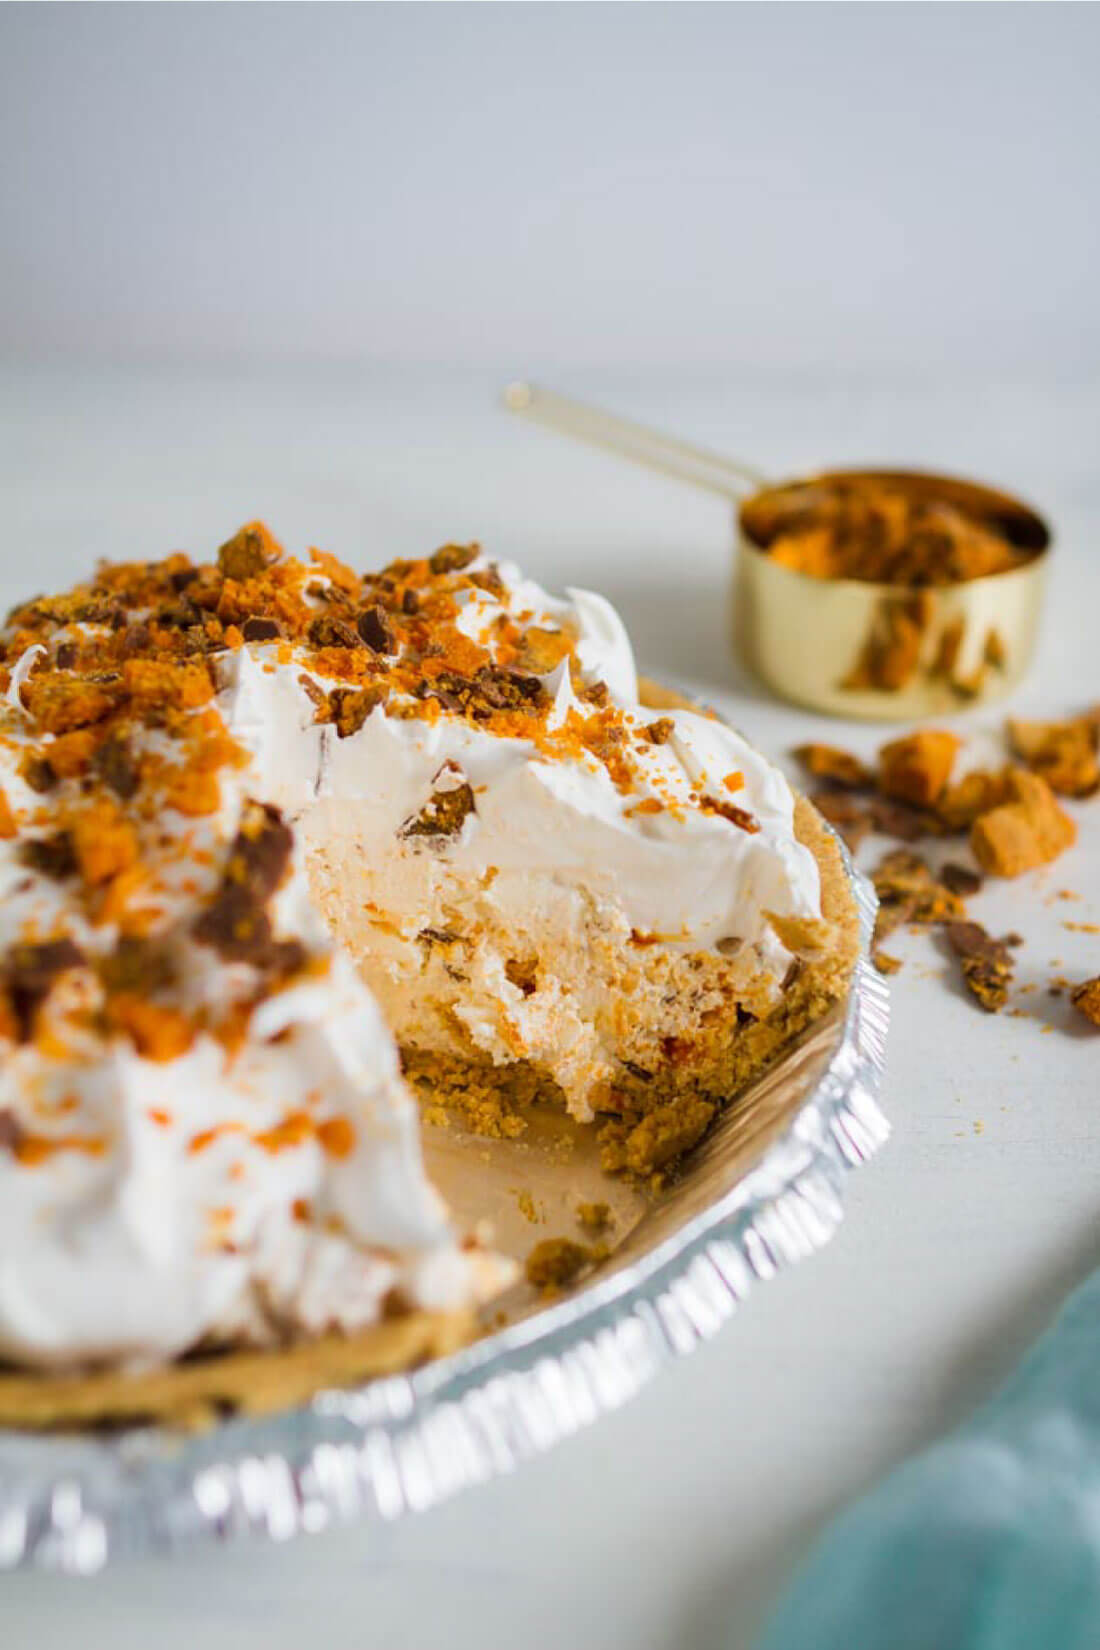 Only 4 ingredient Butterfinger Pie - super easy to make and you can use any candy bar you like! thirtyhandmadedays.com